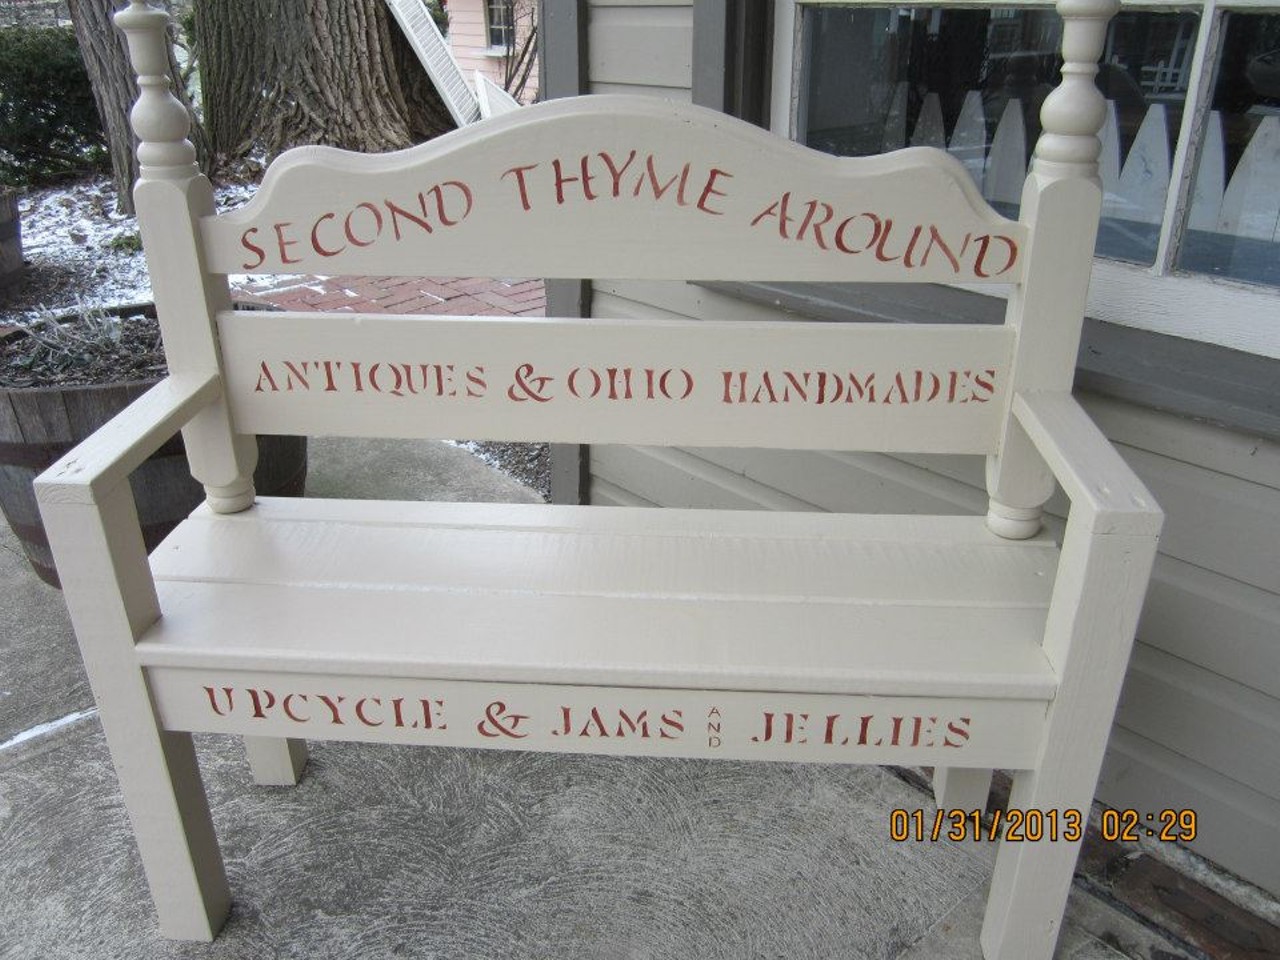 Second Thyme Around
This store mixes together antiques, vintage finds, repurposed goods, and Ohio homemade products, creating the perfect recipe for thrifting bliss. If the four rooms filled with classic treasures and tasty homemade treats aren't enough for you, they also have a seasonal cottage filled with more treasures in the back. Second Thyme Around is a store for all ages spanning across the ages. 
Location: 8153 Orchard Street, Olmsted Falls.
Photo: Second Thyme Around, Facebook